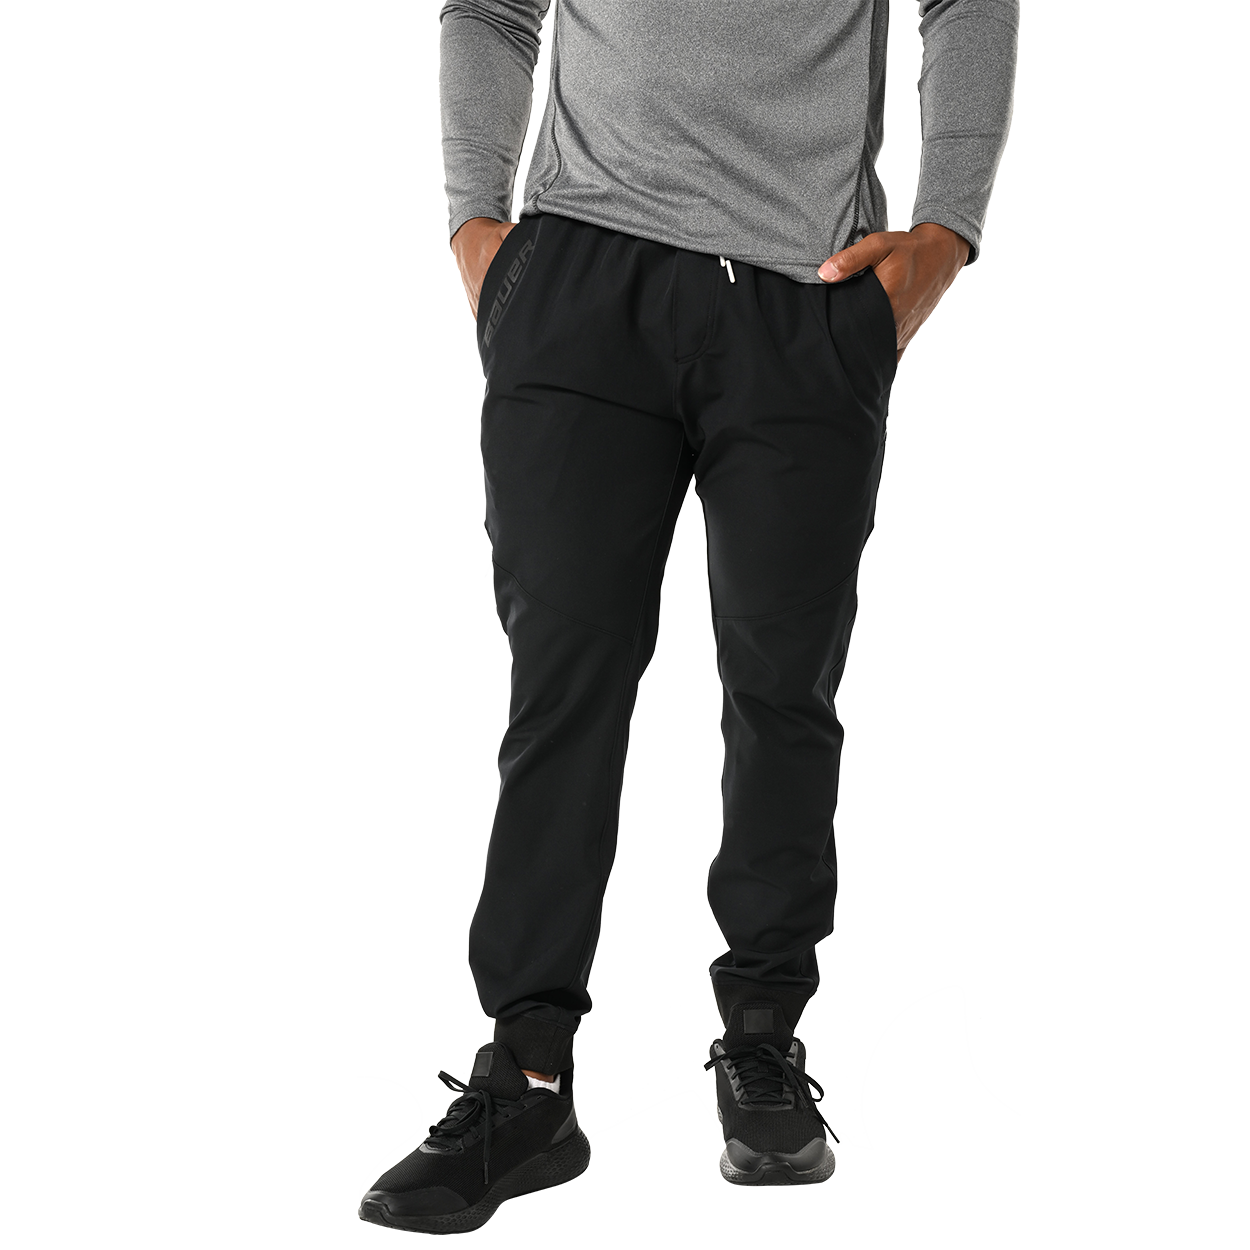 Black jogger total look with modal